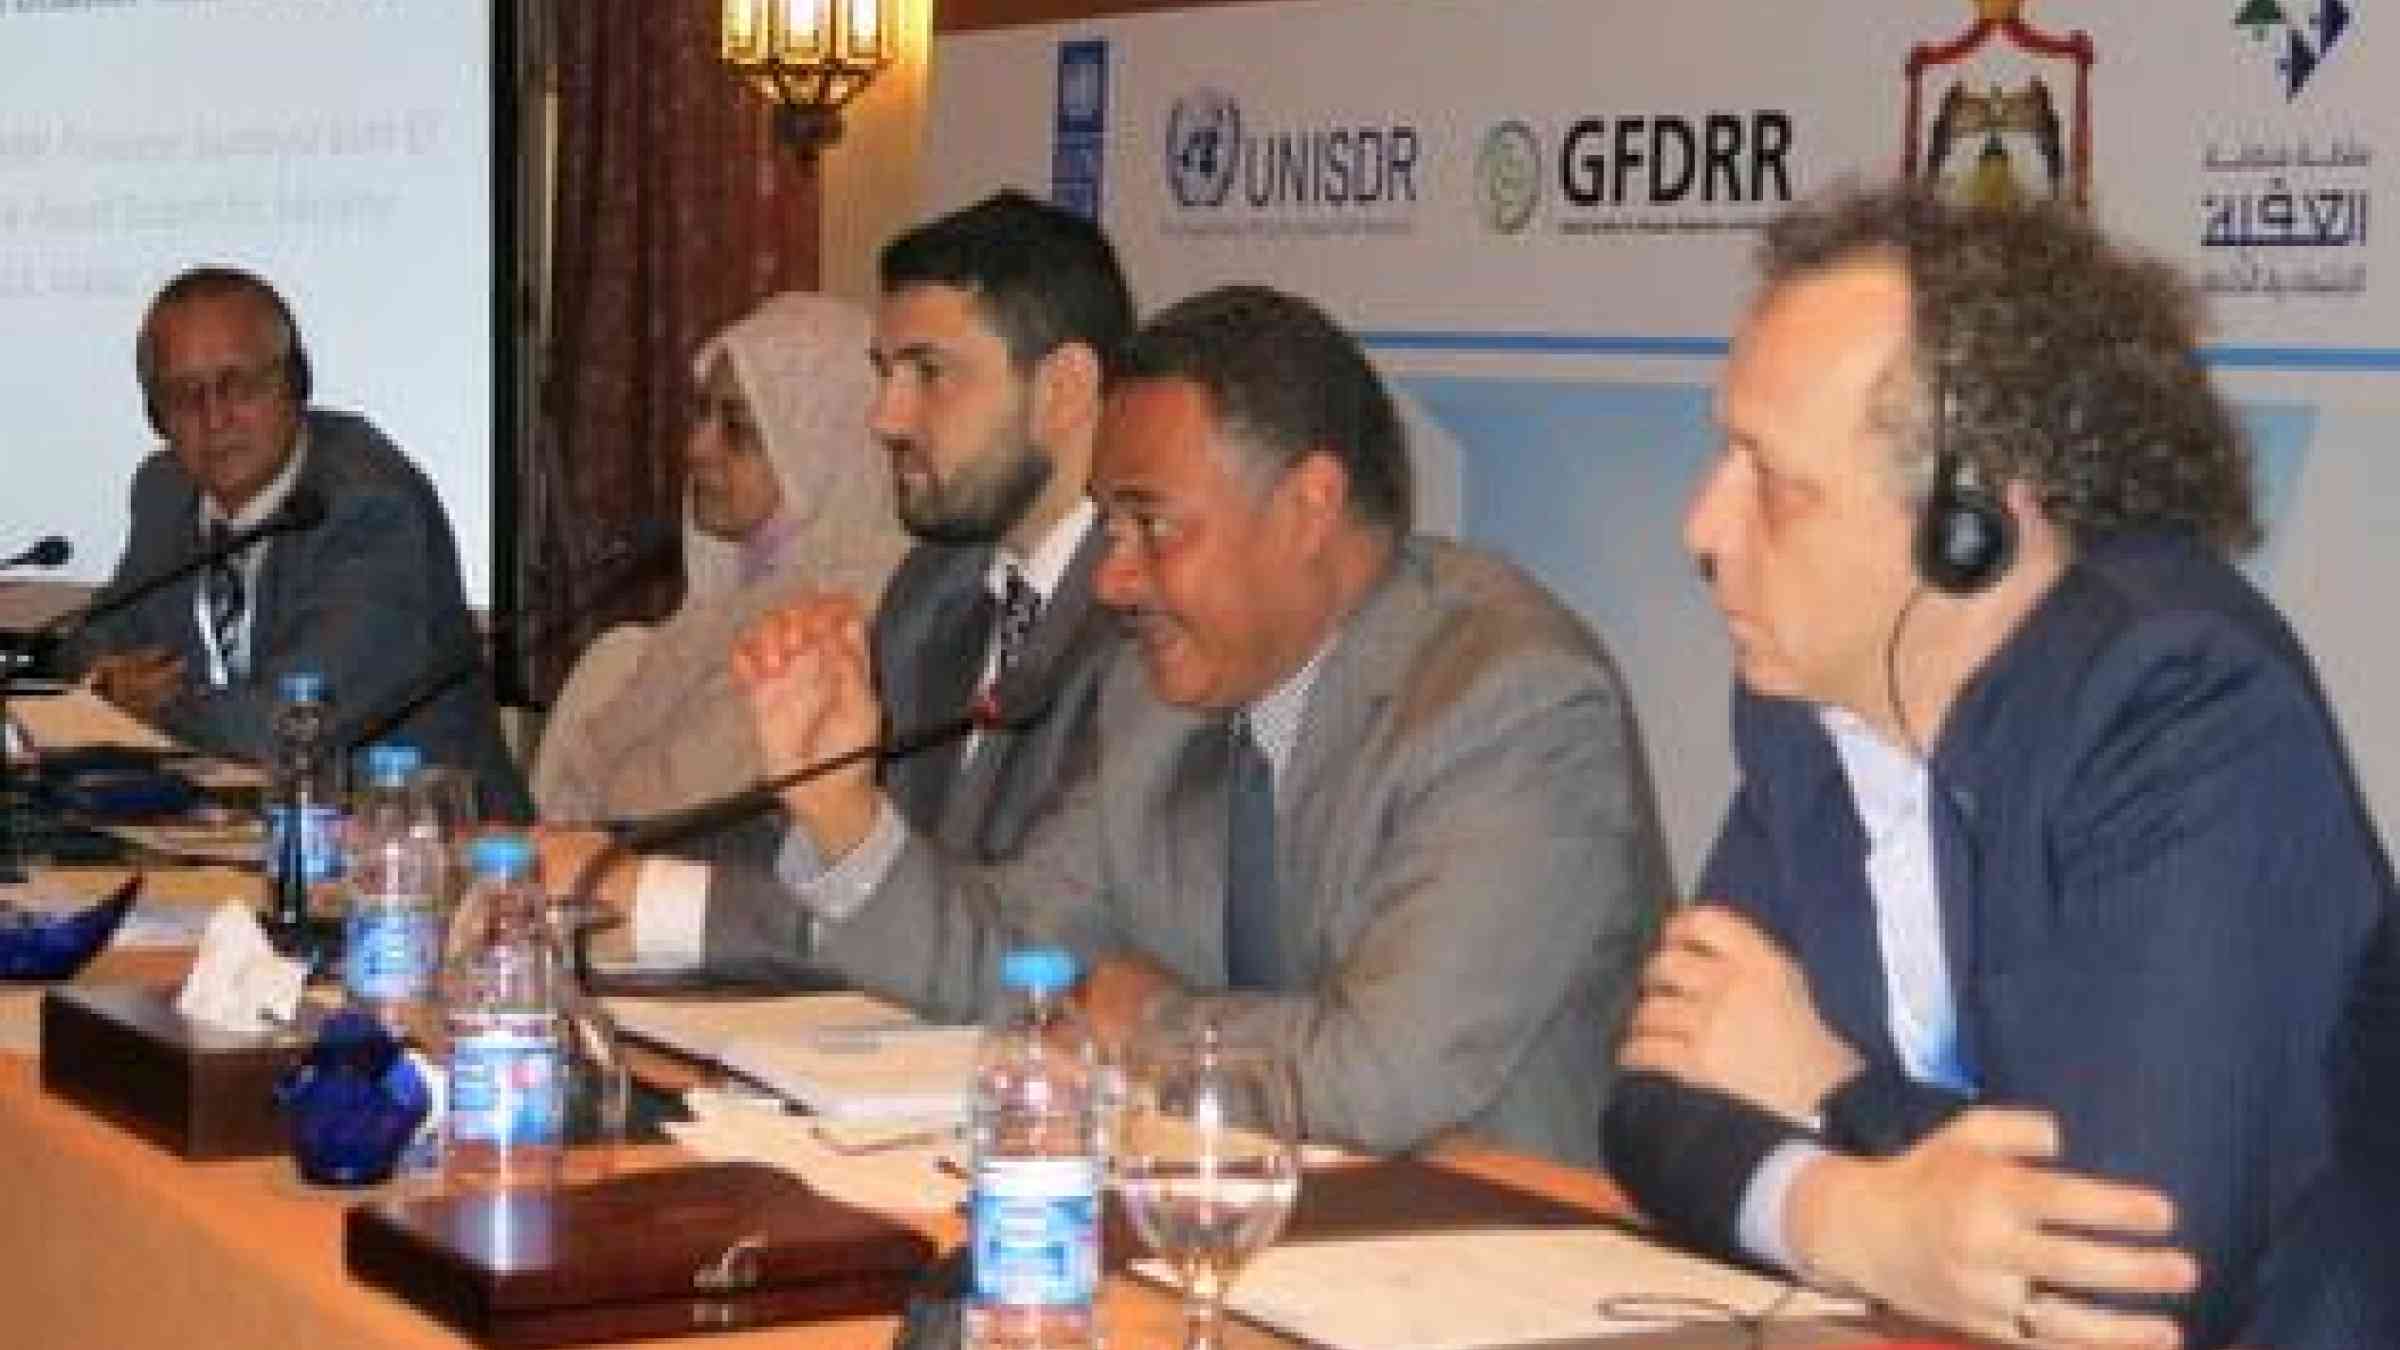 On the speaker's platform yesterday for the closing session of the First Arab Regional Conference on Disaster Risk Reduction. From left: Juerg Zumstein, Swiss Agency for Development and Cooperation; Ambassador Shahira Wahbi, League of Arab States;  Dr. Muhanned Adnan Hararah, Aqaba's Commissioner for Environment and Health Control; UNISDR head of office for Arab States, Amjad Abbashar; and Jo Scheuer, Coordinator, DRR and Recovery Team, UNDP.